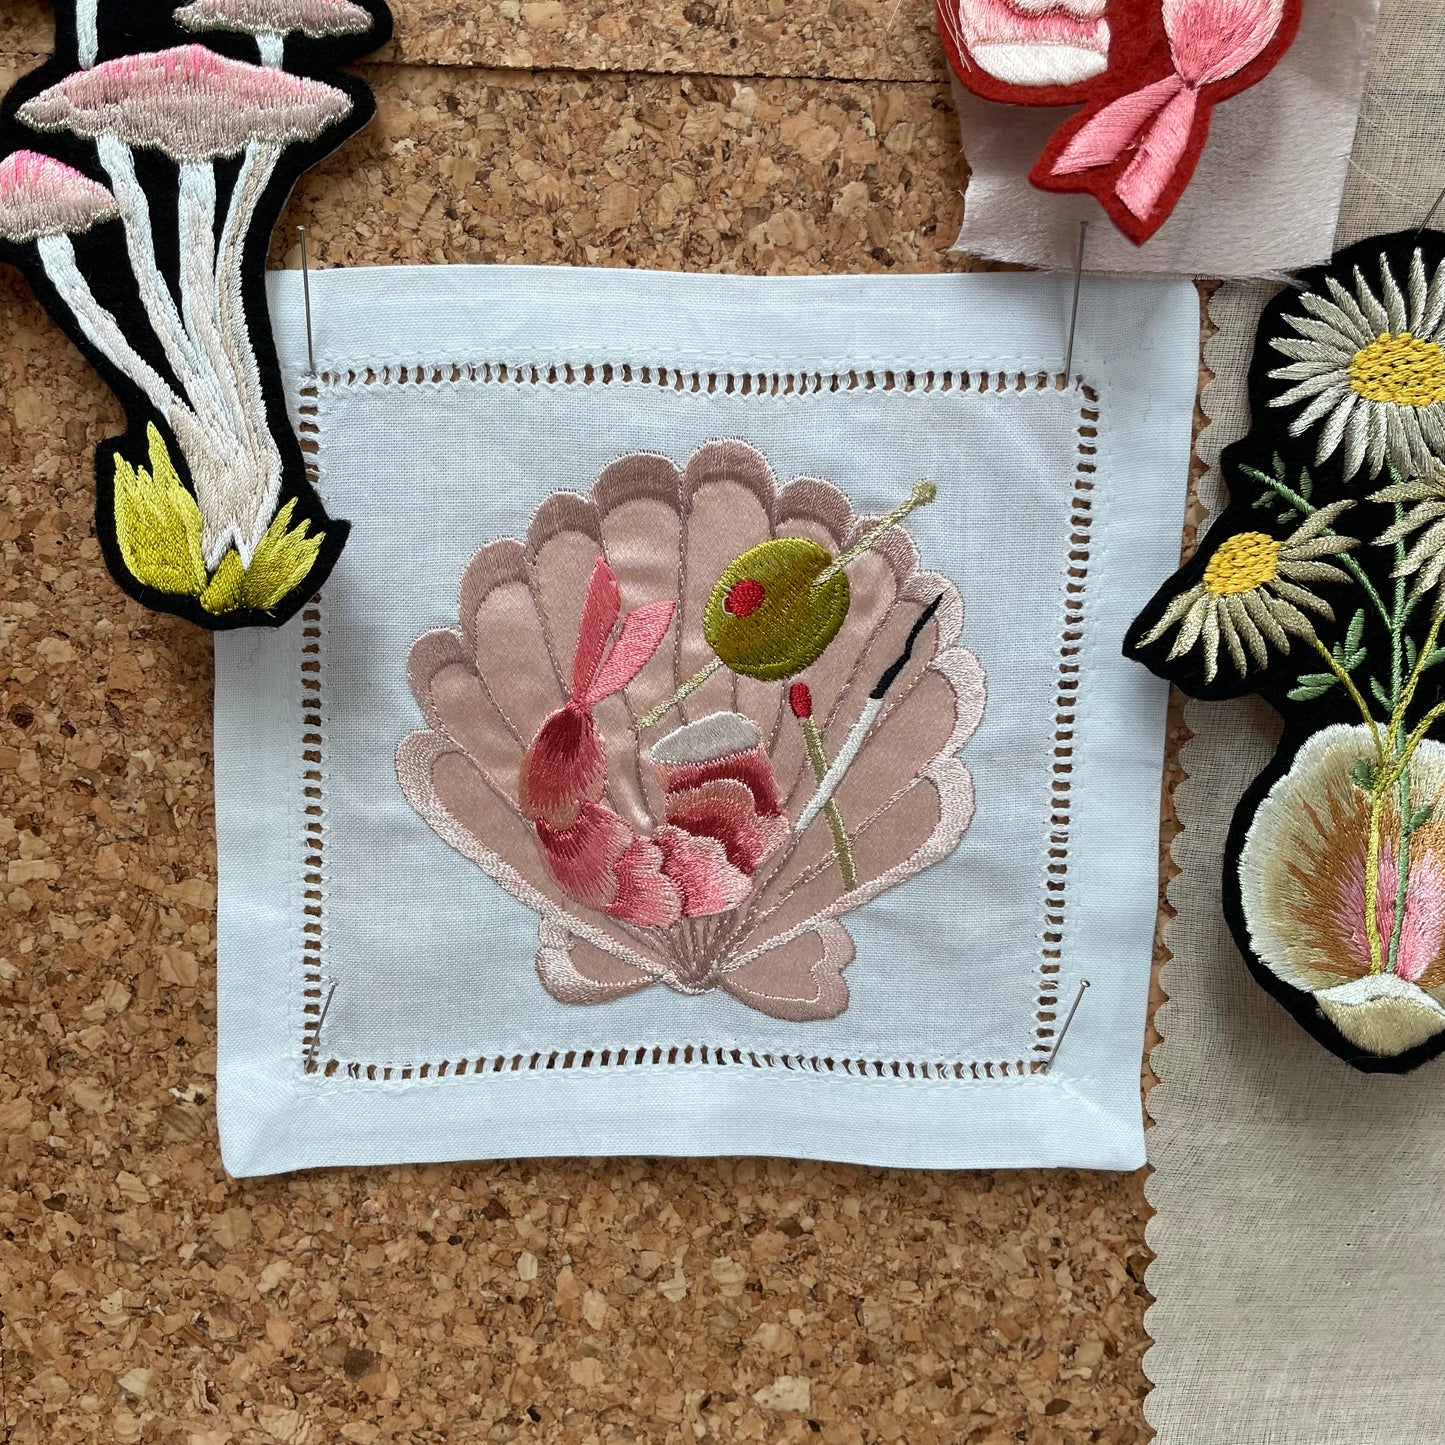 Embroidered Napkin by Ellie Mac Embroidery Pinned To Corkboard